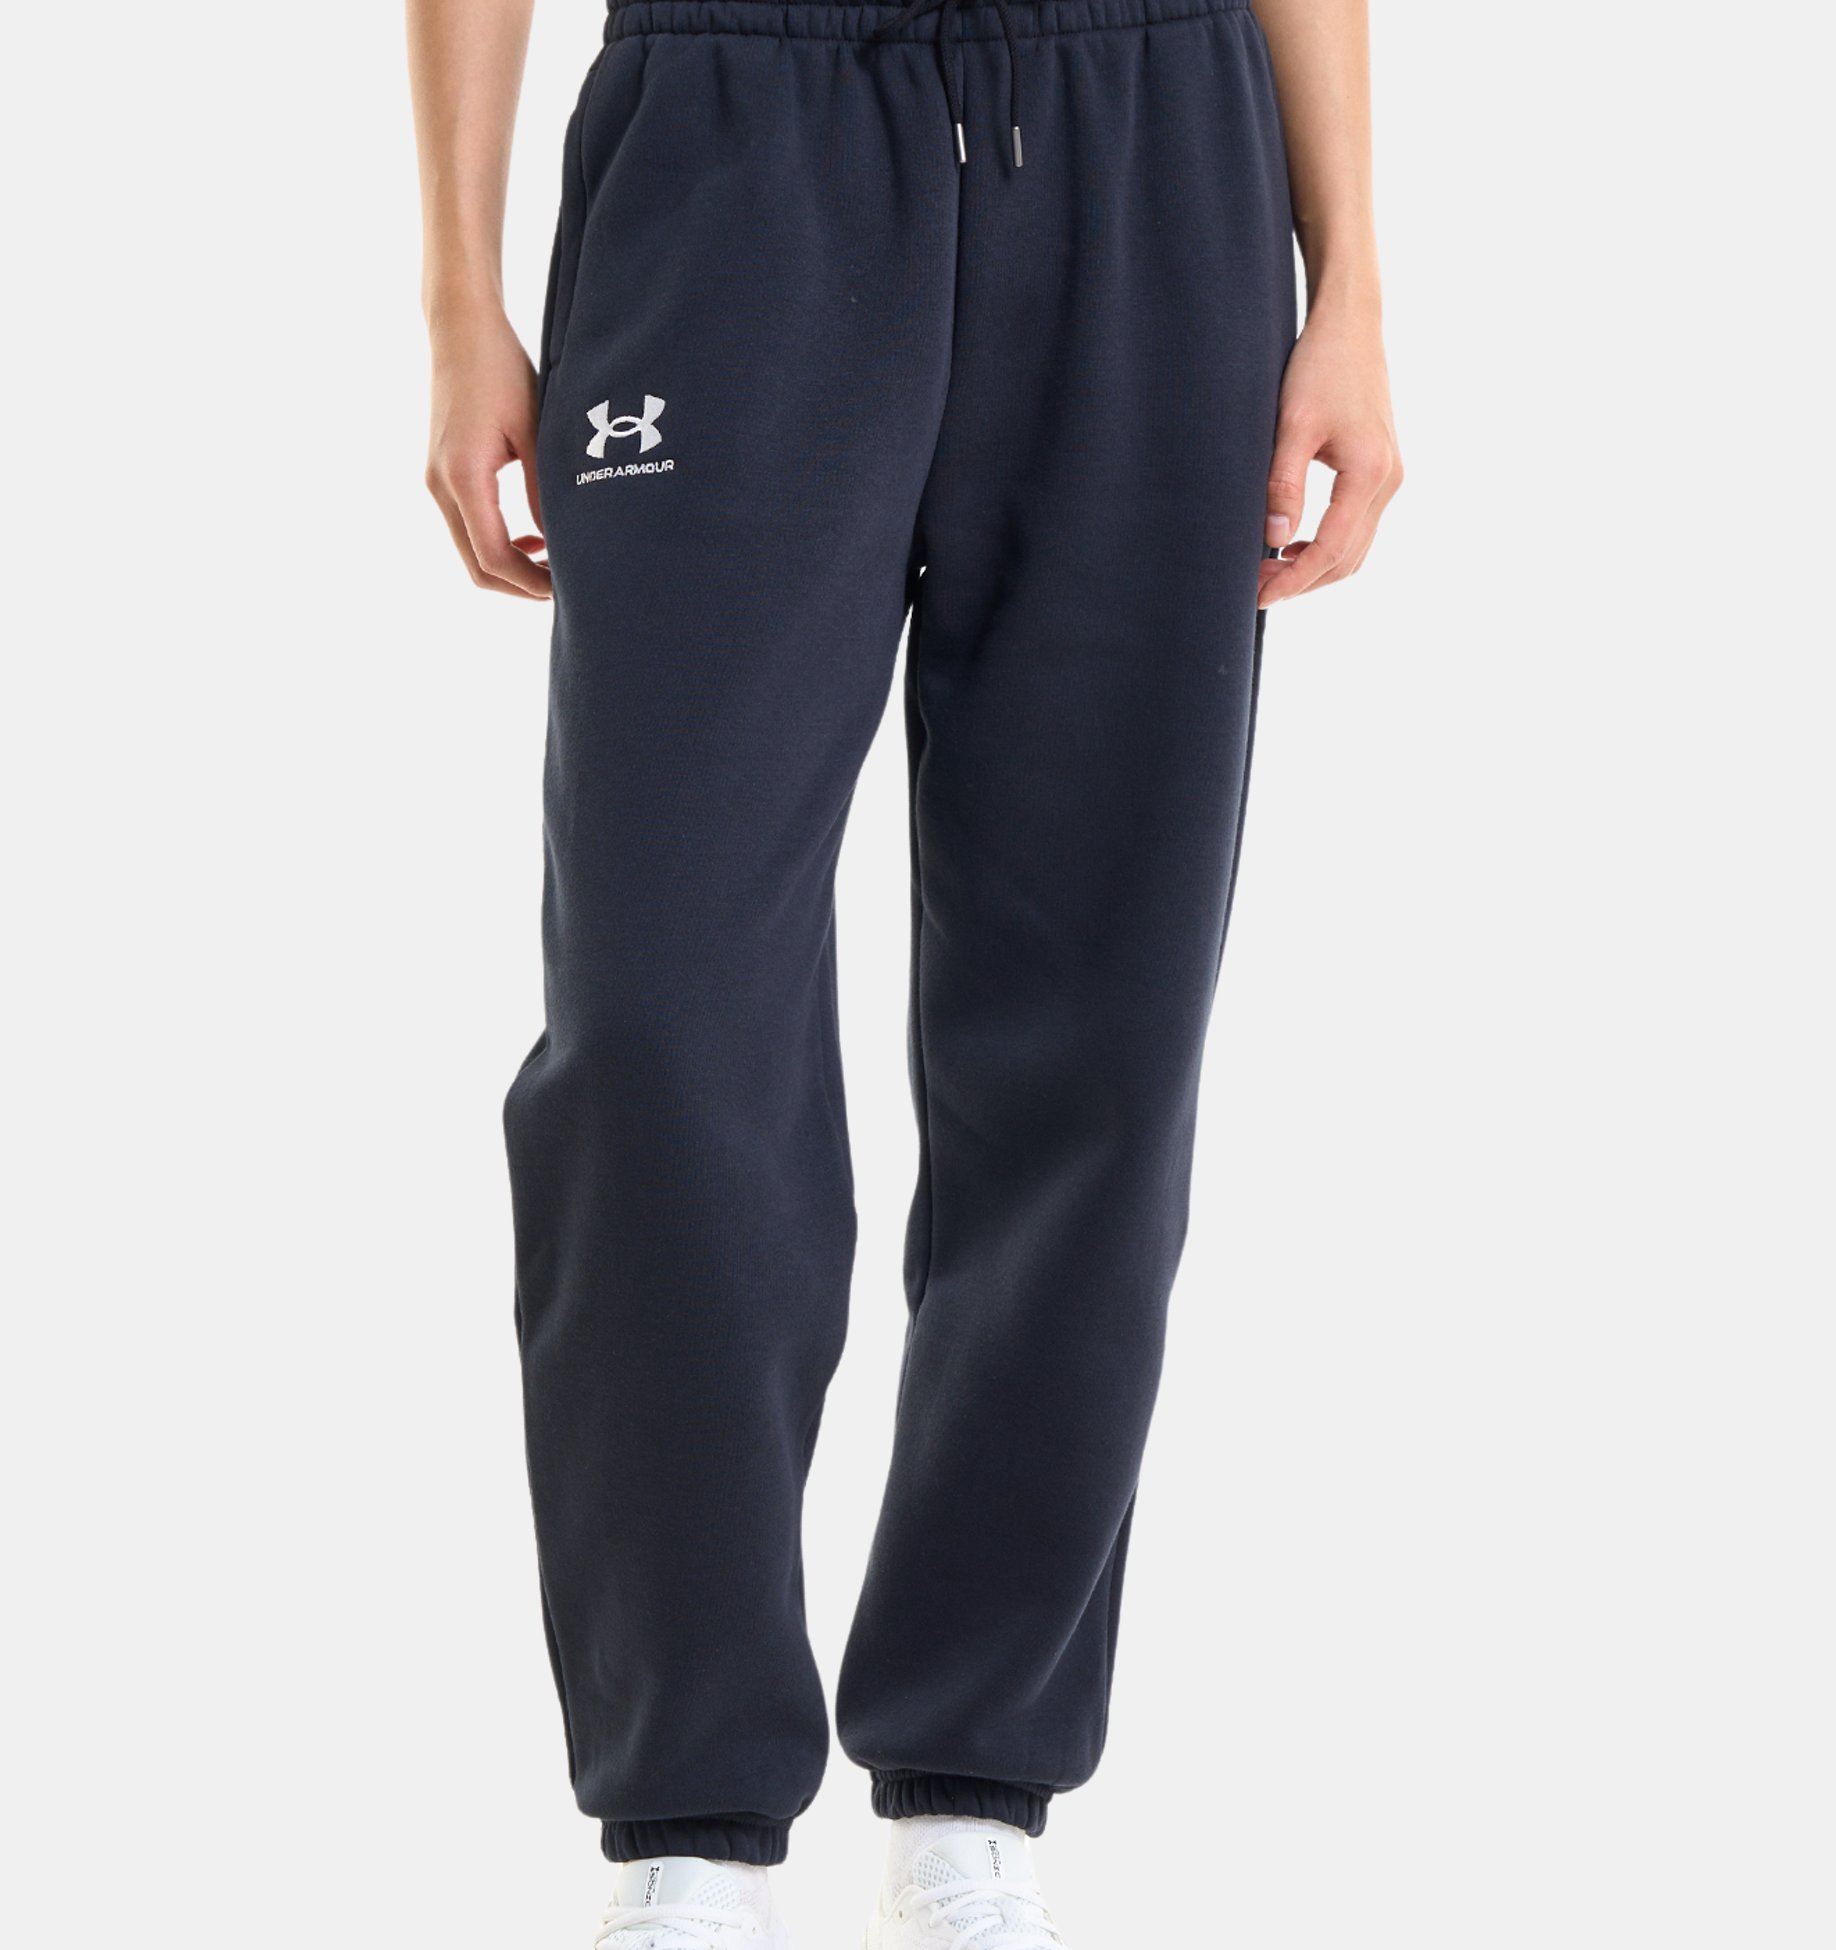 https://underarmour.scene7.com/is/image/Underarmour/V5-1373034-001_FC_KR?rp=standard-0pad|pdpZoomDesktop&scl=0.72&fmt=jpg&qlt=85&resMode=sharp2&cache=on,on&bgc=f0f0f0&wid=1836&hei=1950&size=1500,1500